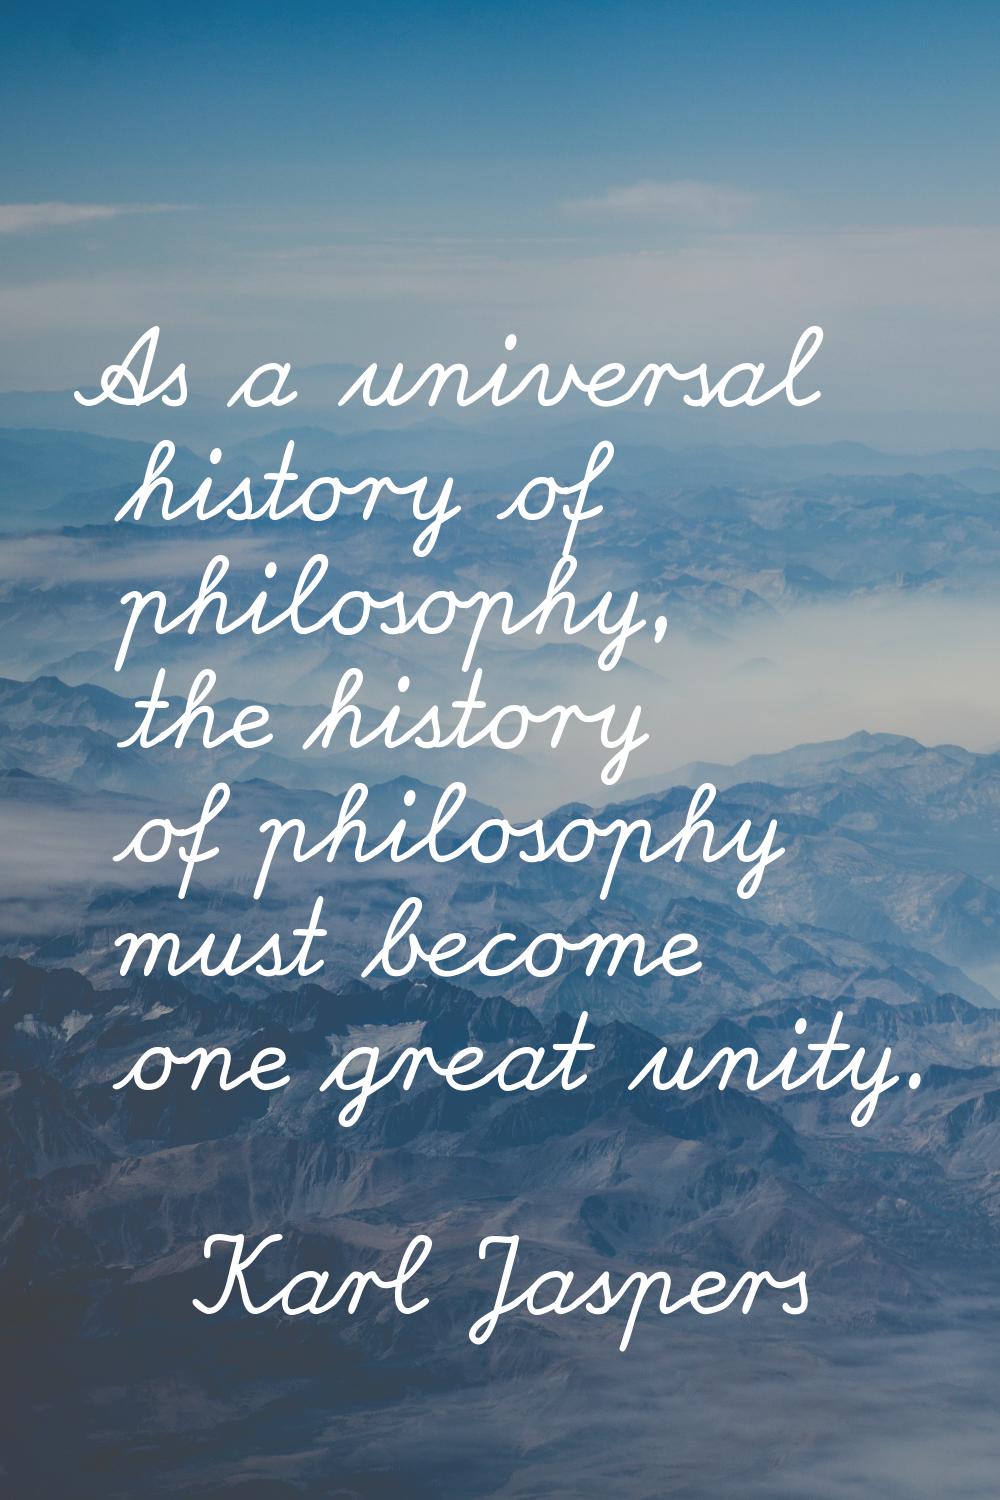 As a universal history of philosophy, the history of philosophy must become one great unity.